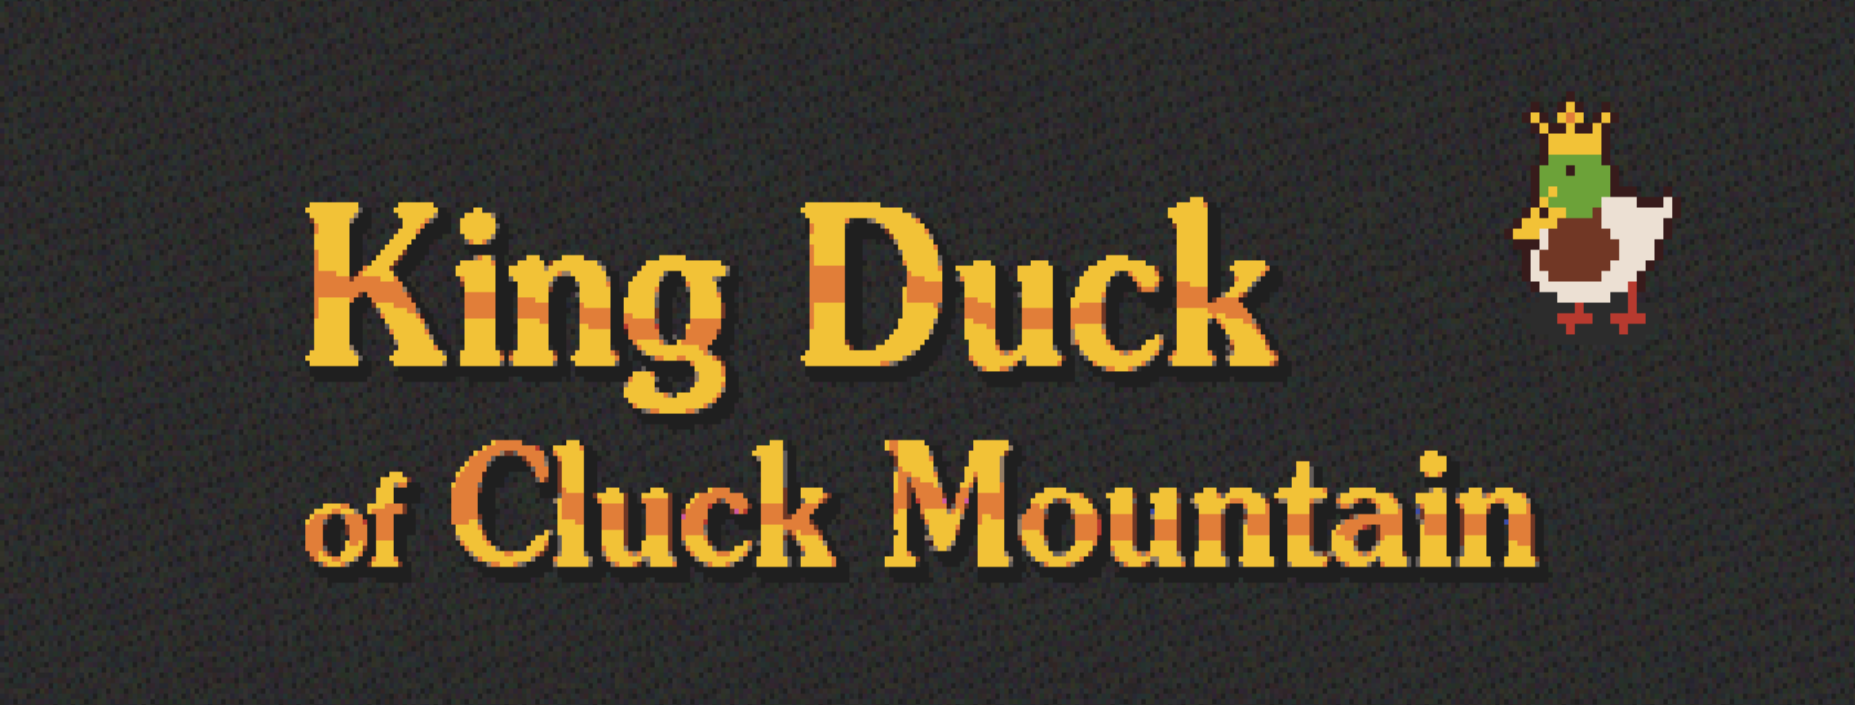 King Duck of Cluck Mountain